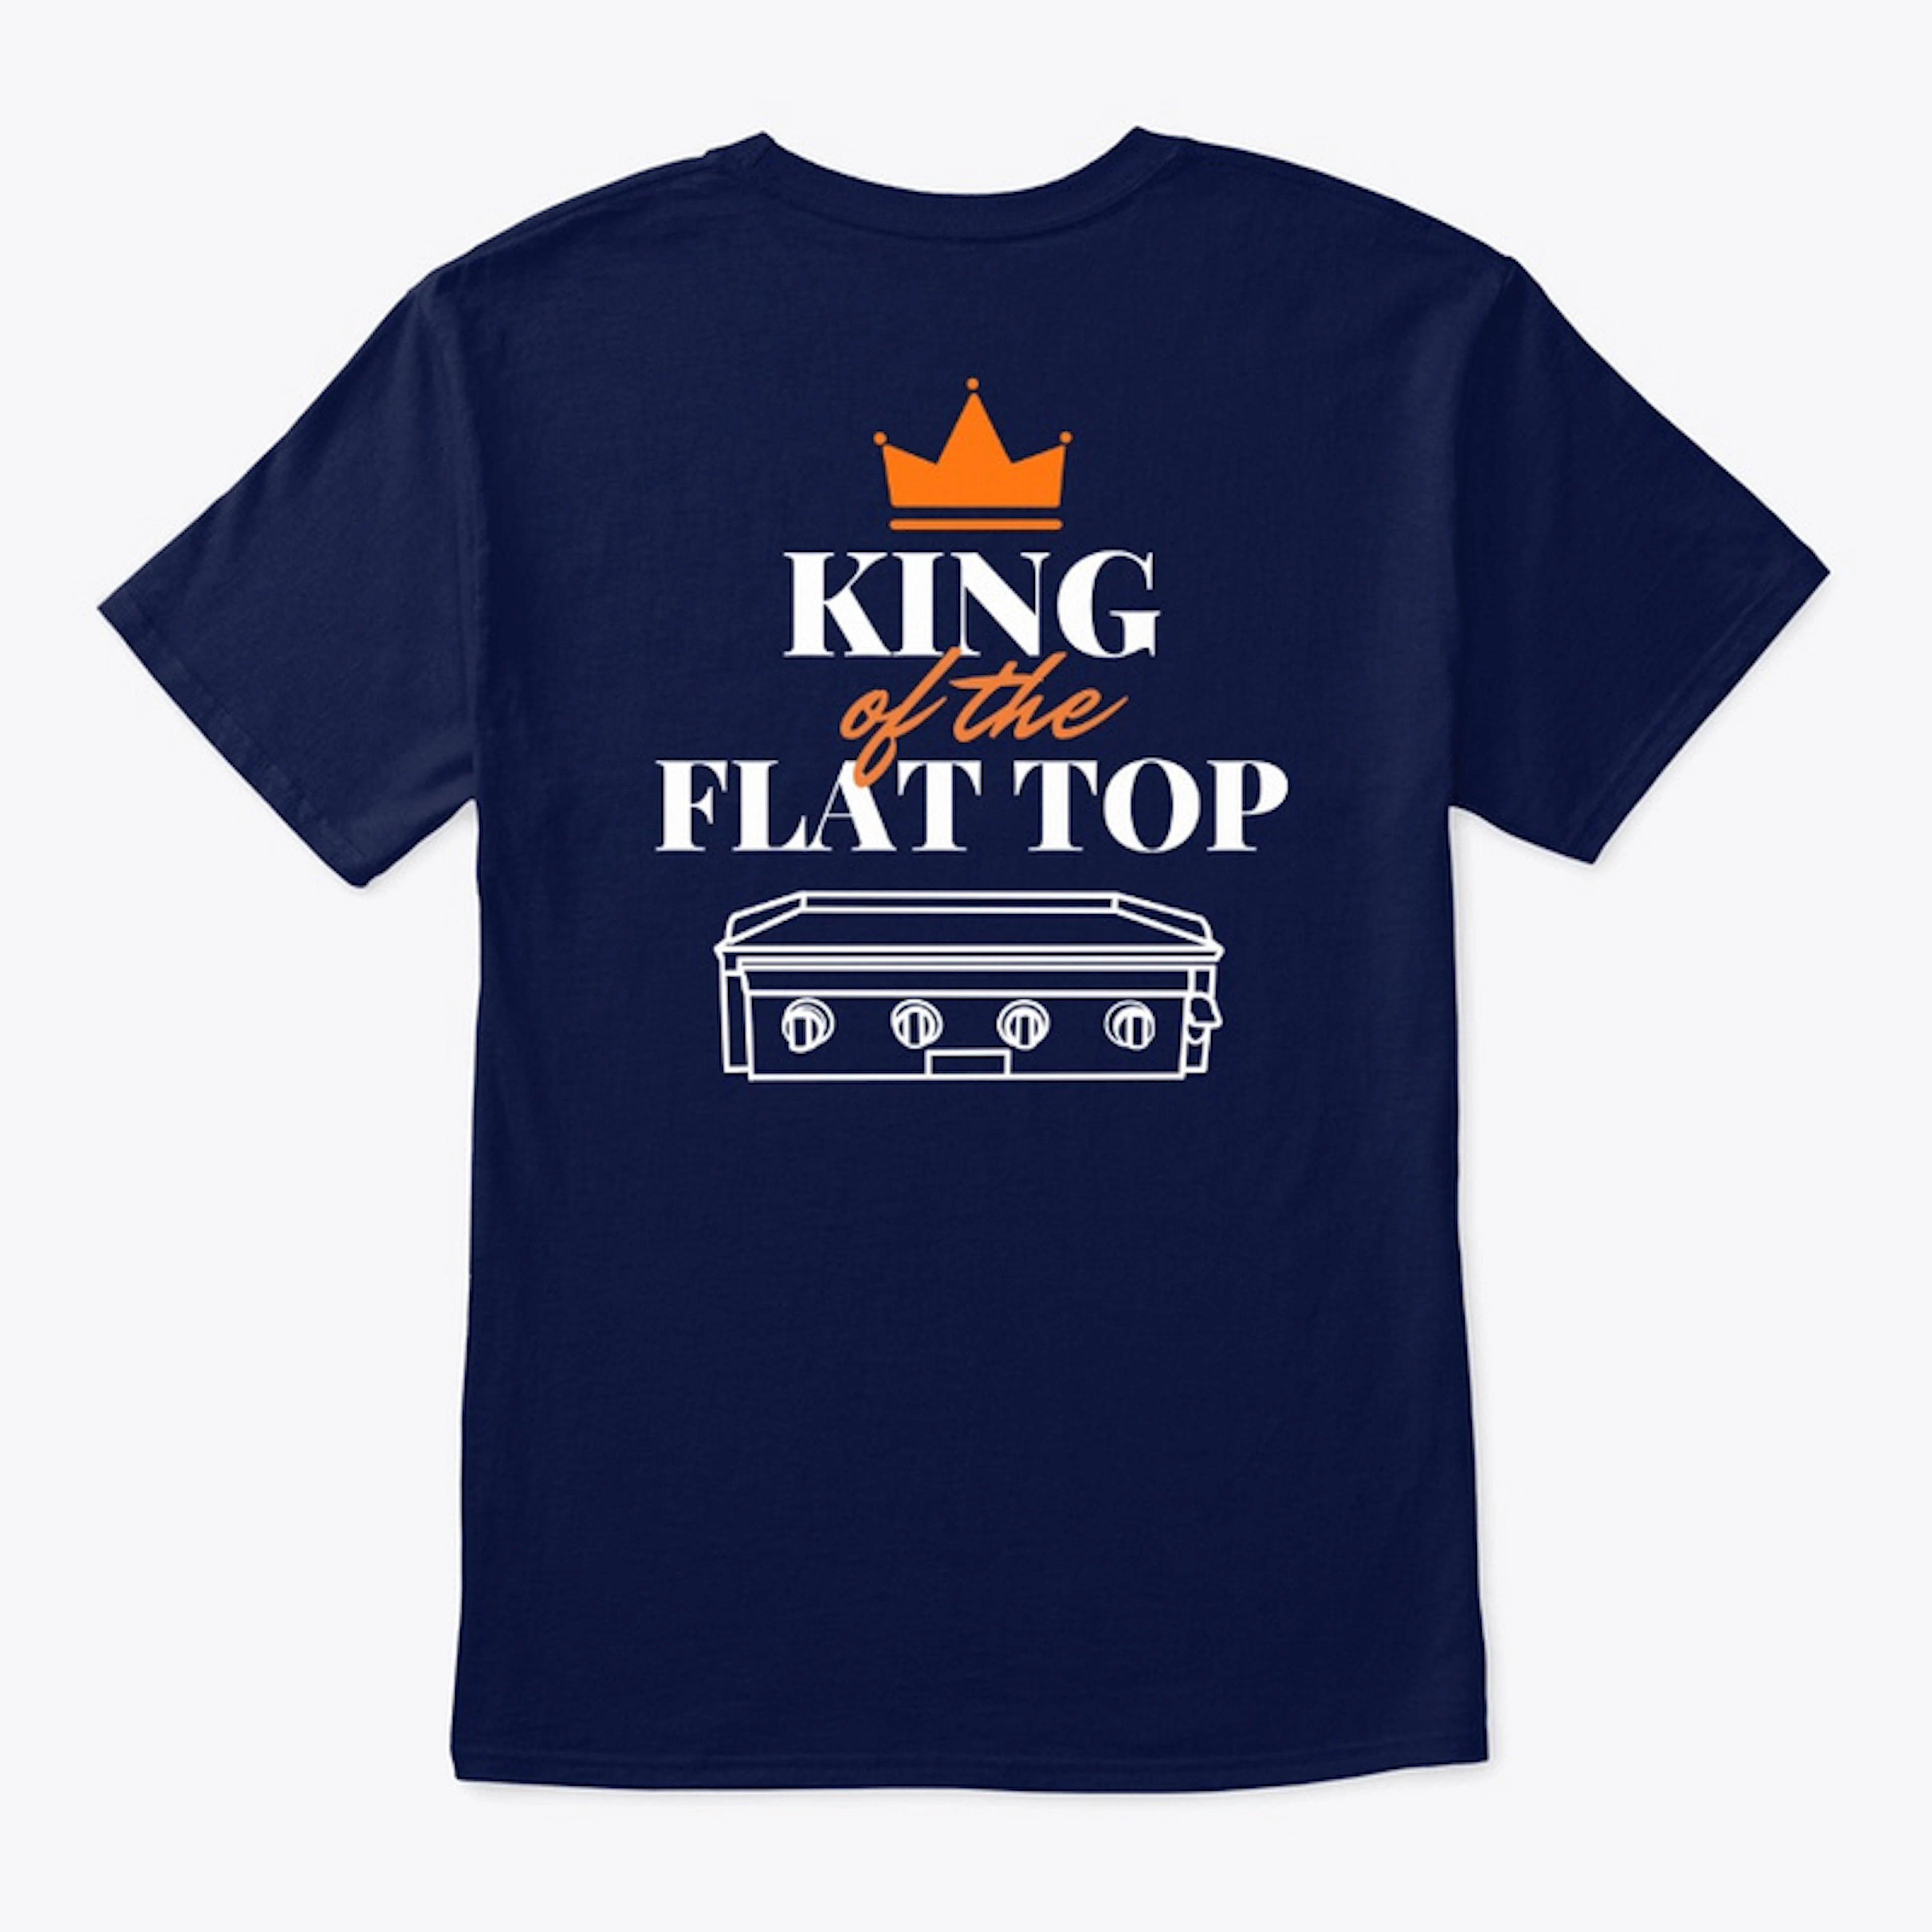 "King of the Flat Top" T-Shirt